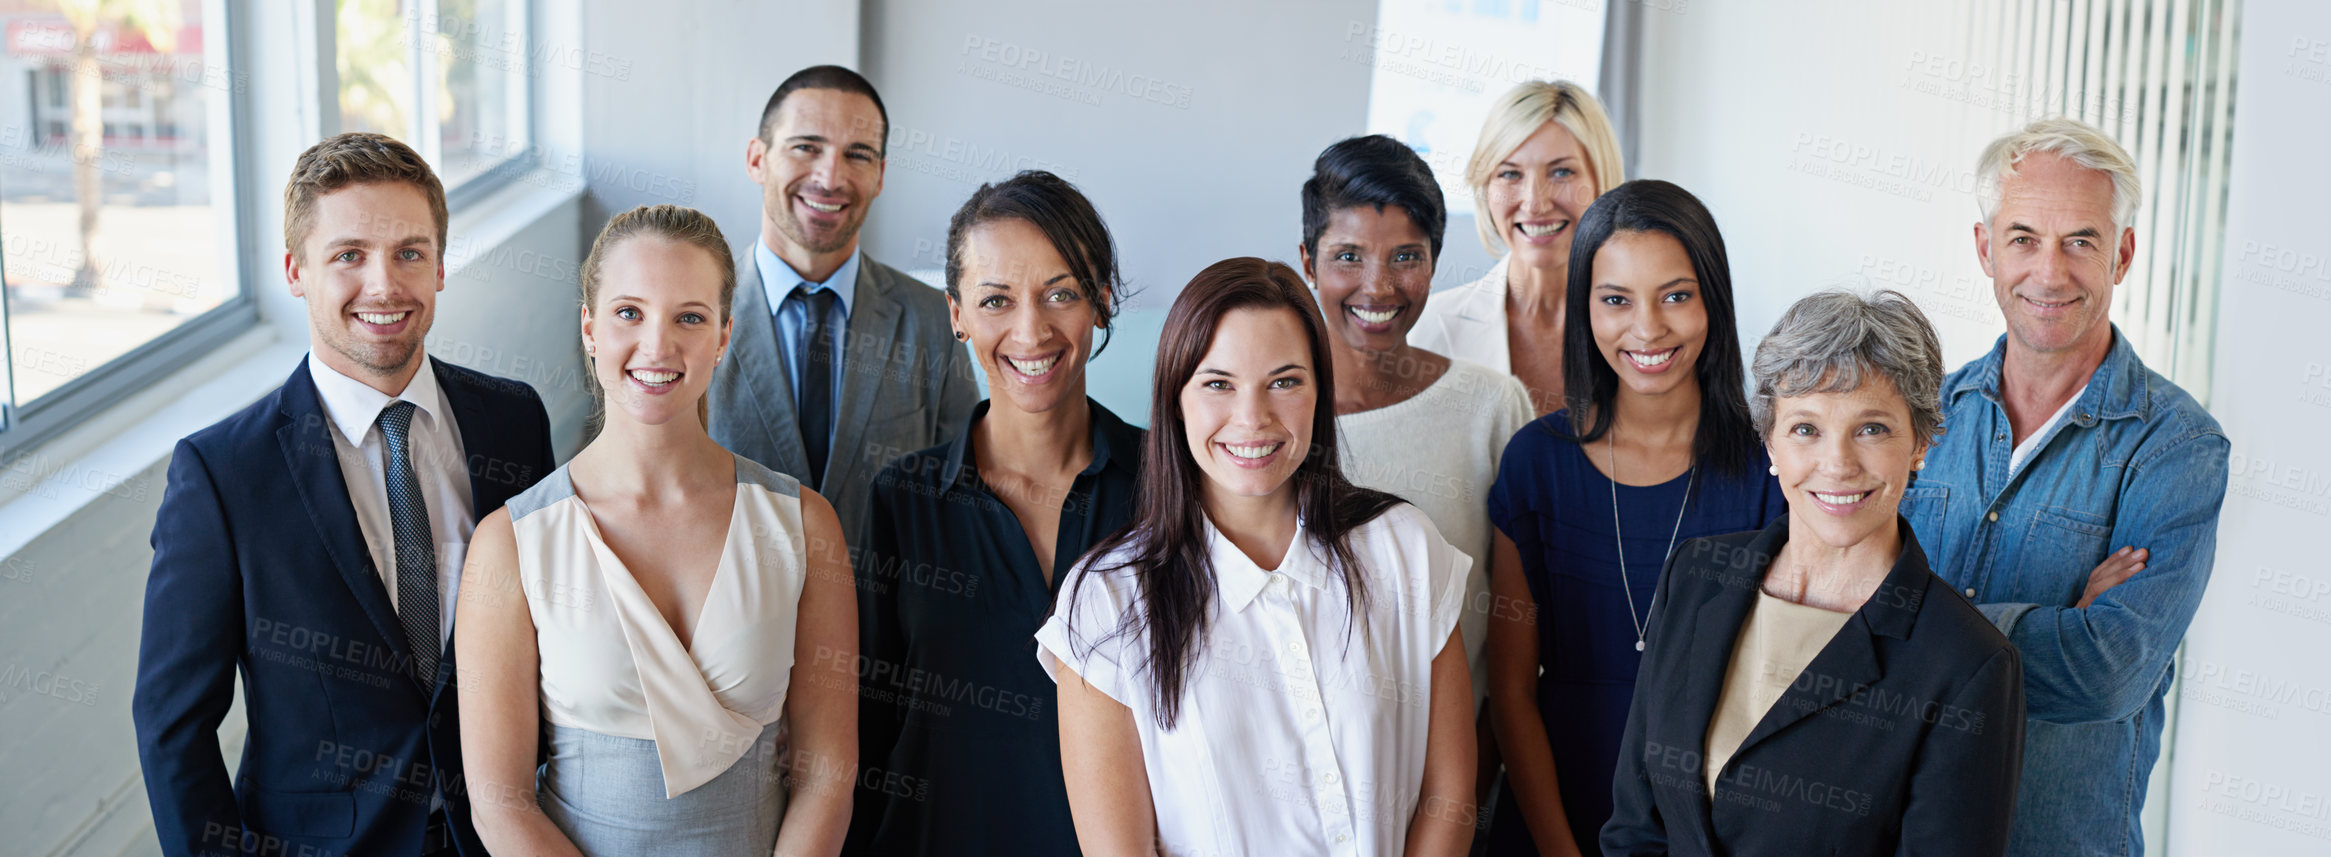 Buy stock photo Teamwork, portrait and happy business people standing together for leadership, management and diversity in company. Smile on faces of employees, women or men in group collaboration and career mindset